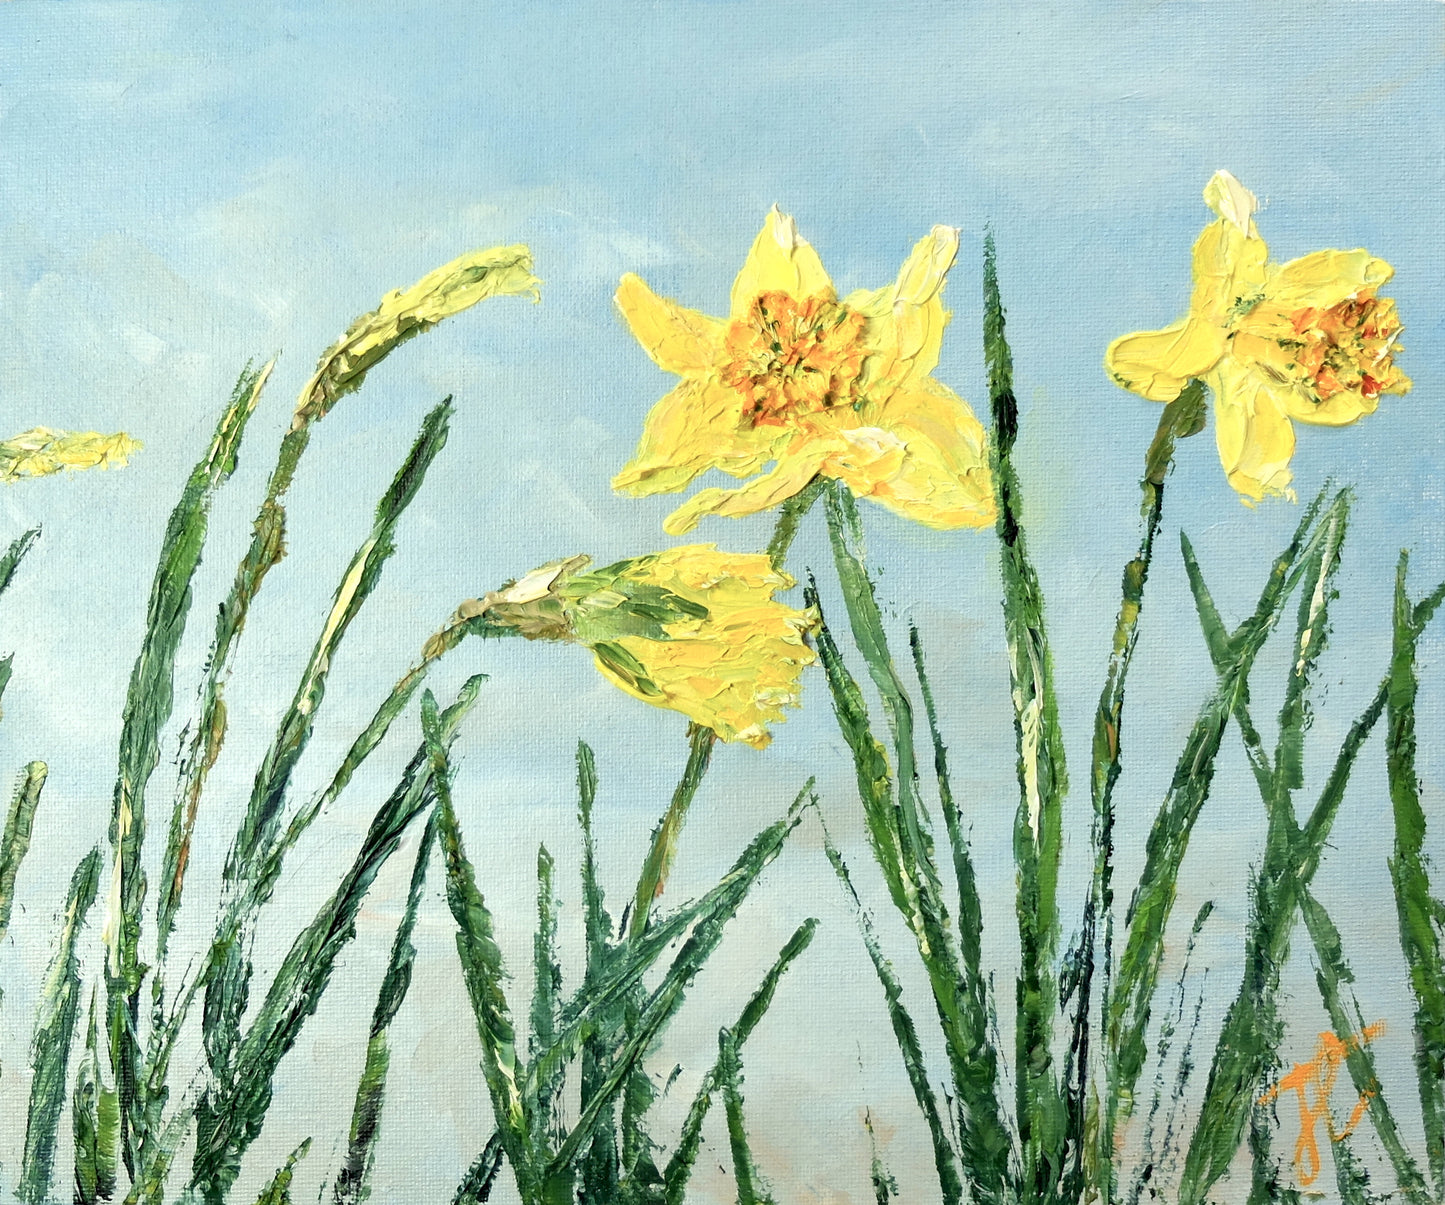 Painting of a row of daffodil plants in bloom, the ones to the left of the painting are in different stages of bud and the two to the right are fully open. The background is a blue sky with soft hints of cloud. The painting has a textured surface where the daffodils are.